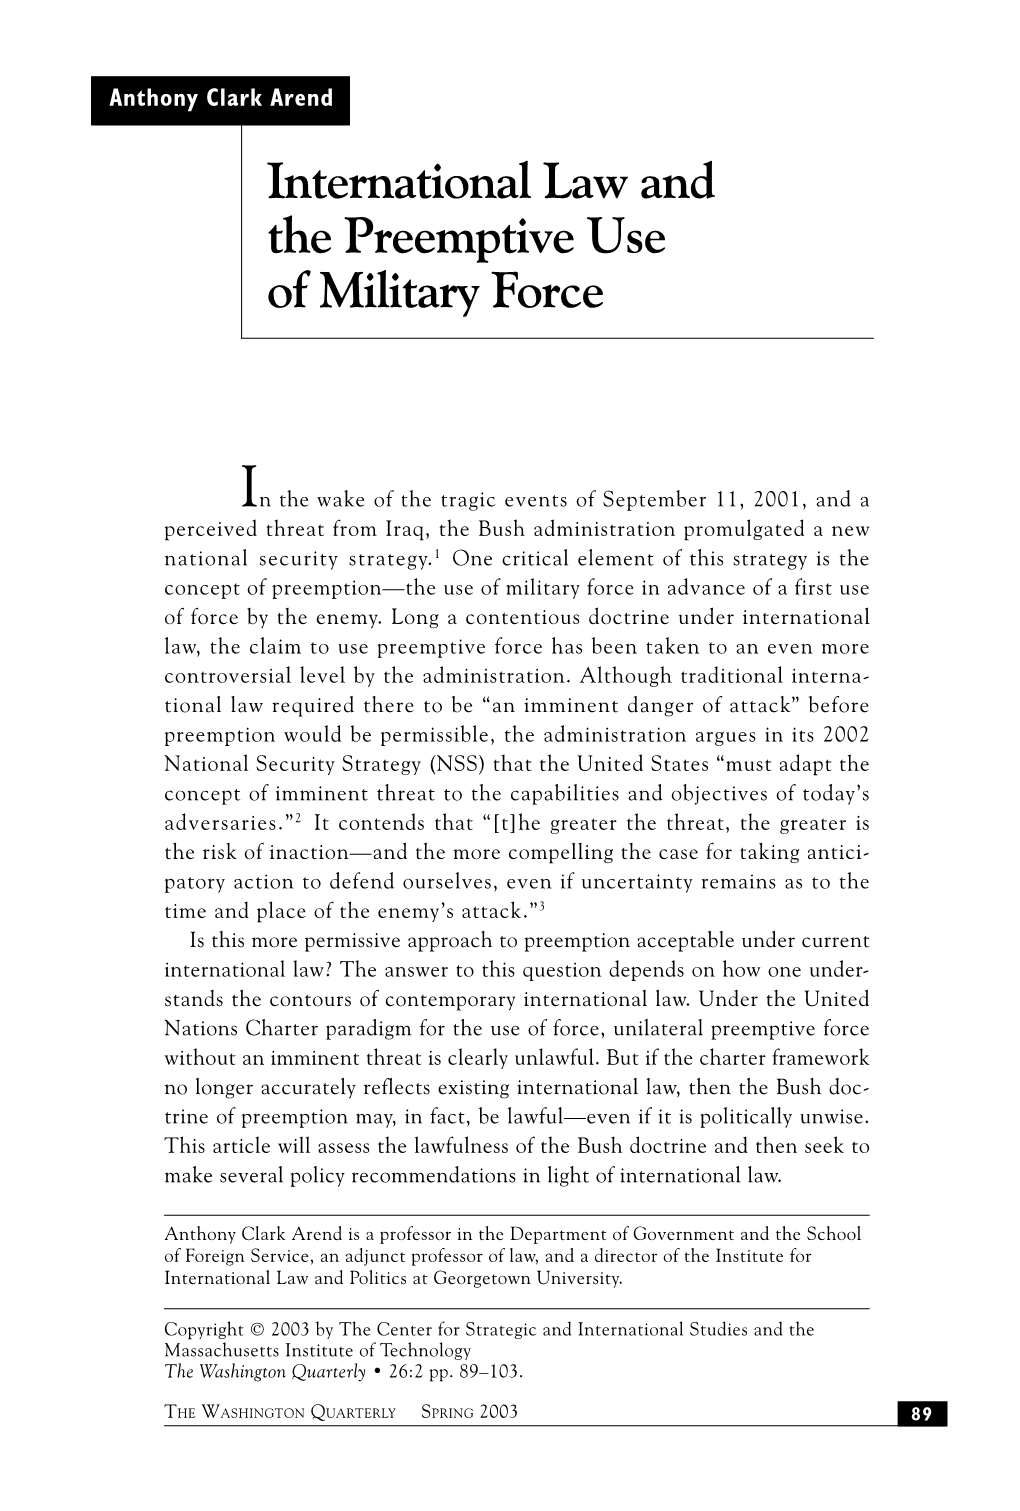 International Law and the Preemptive Use of Military Force